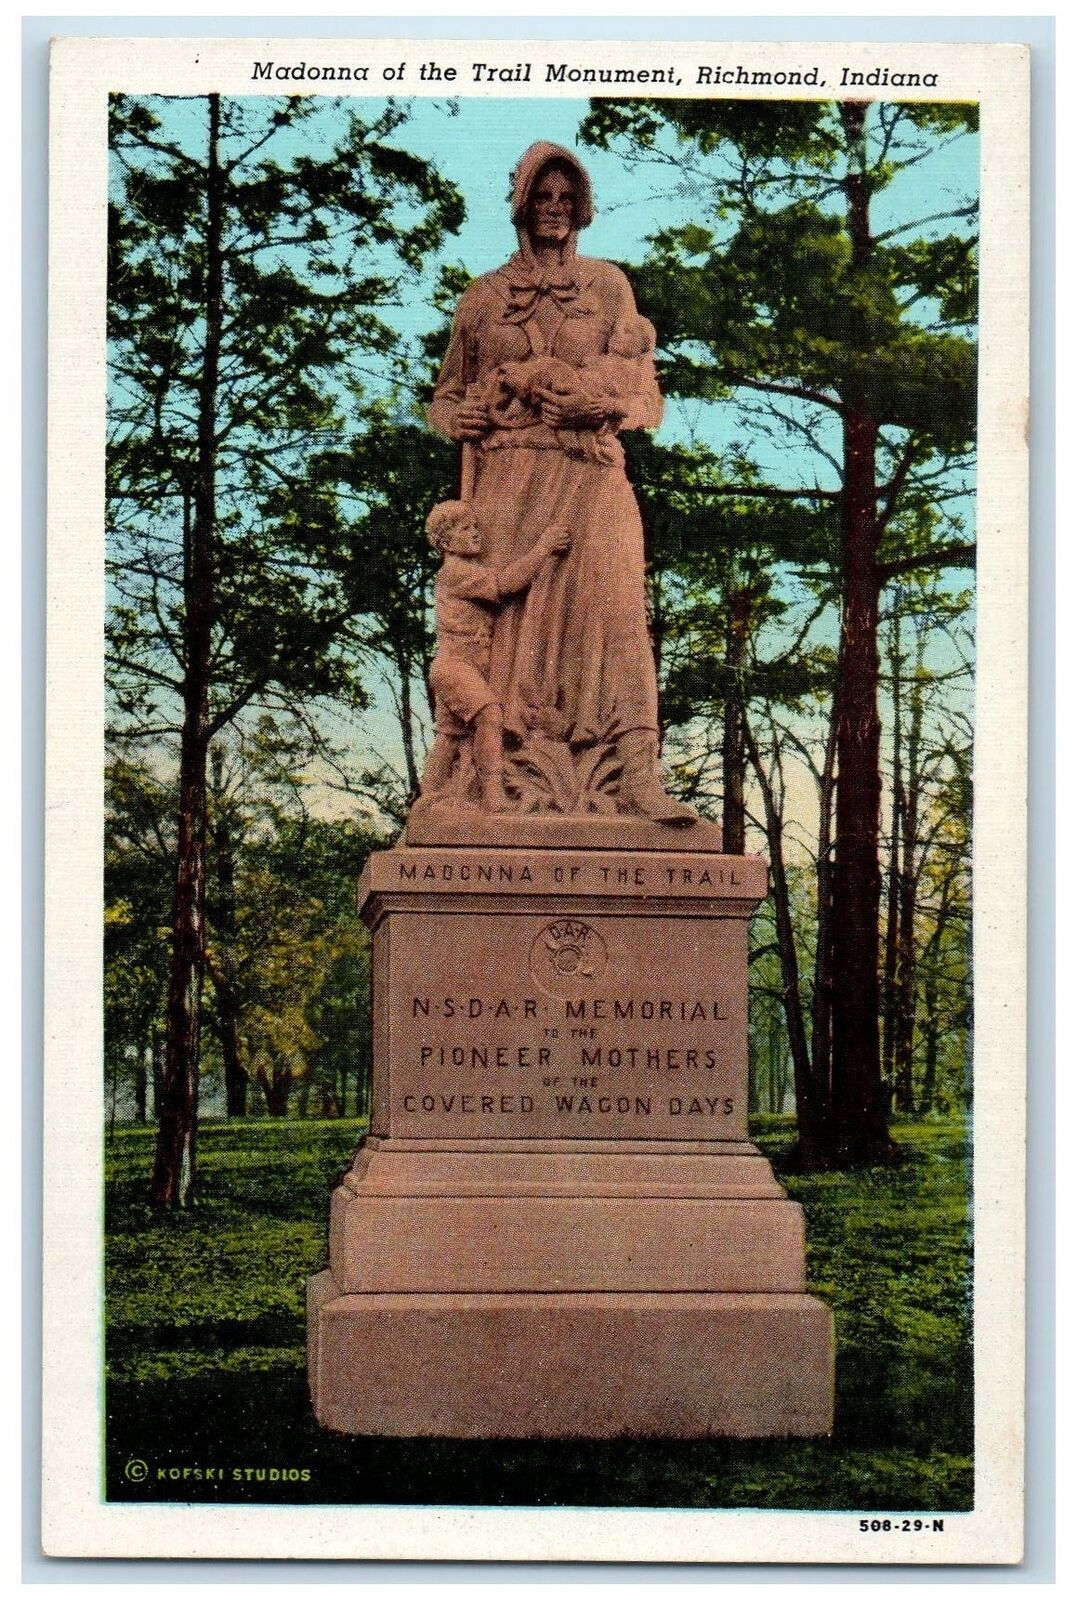 Madonna Of The Trail Monument Statue Richmond Indiana IN Vintage Postcard